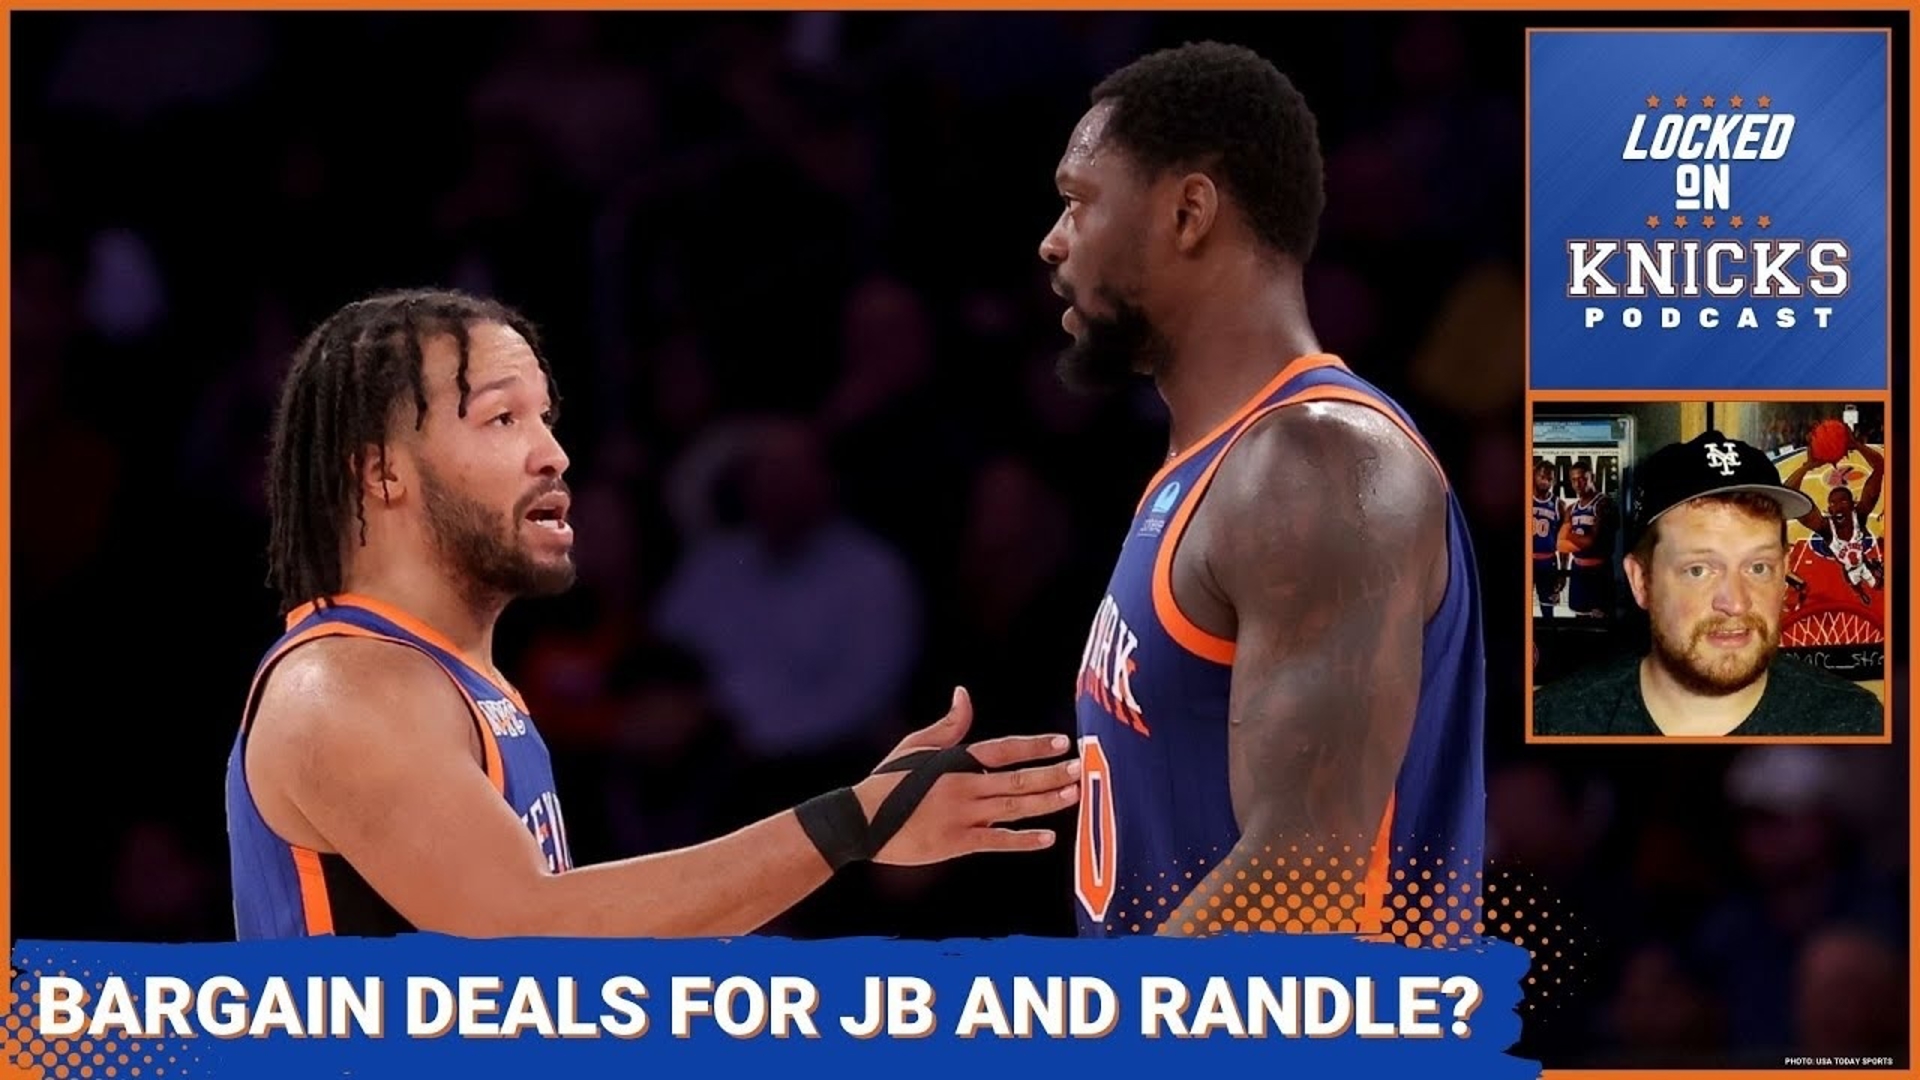 Alex continues his breakdown of every player's contract on the Knicks this season.